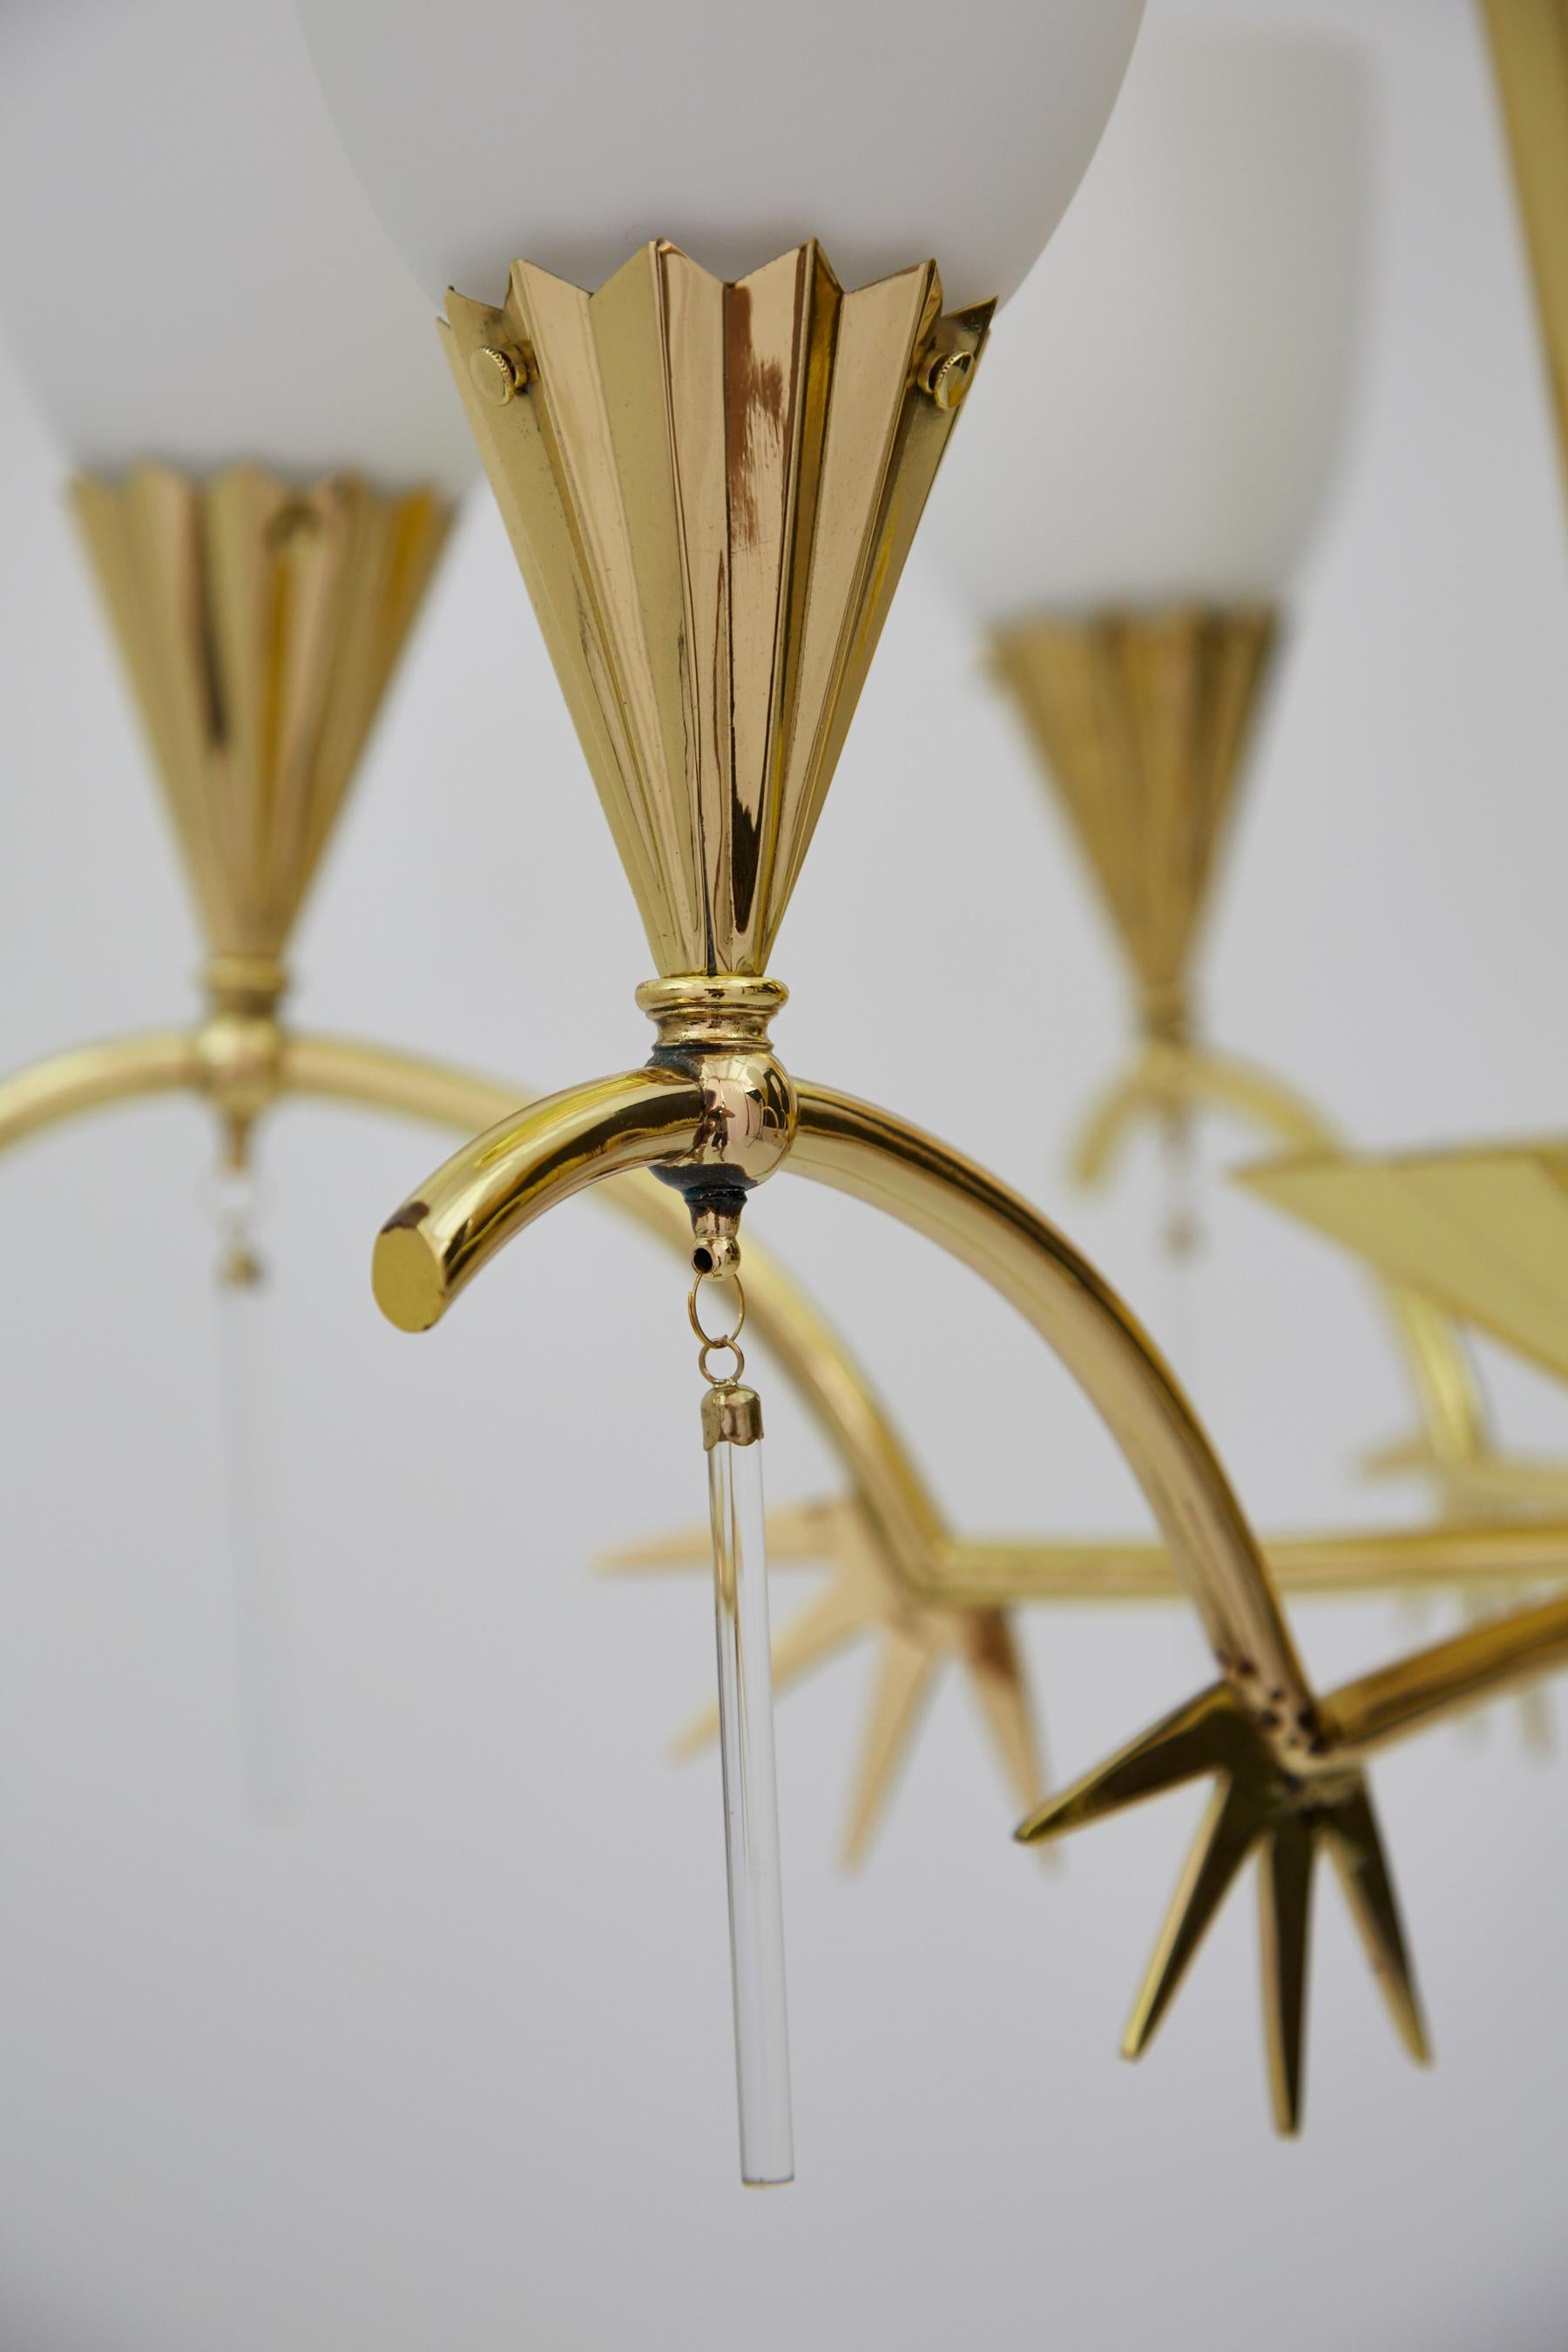 Mid-20th Century Six-Arm Italian Brass Chandelier with Decorative Spikes, 1940s For Sale